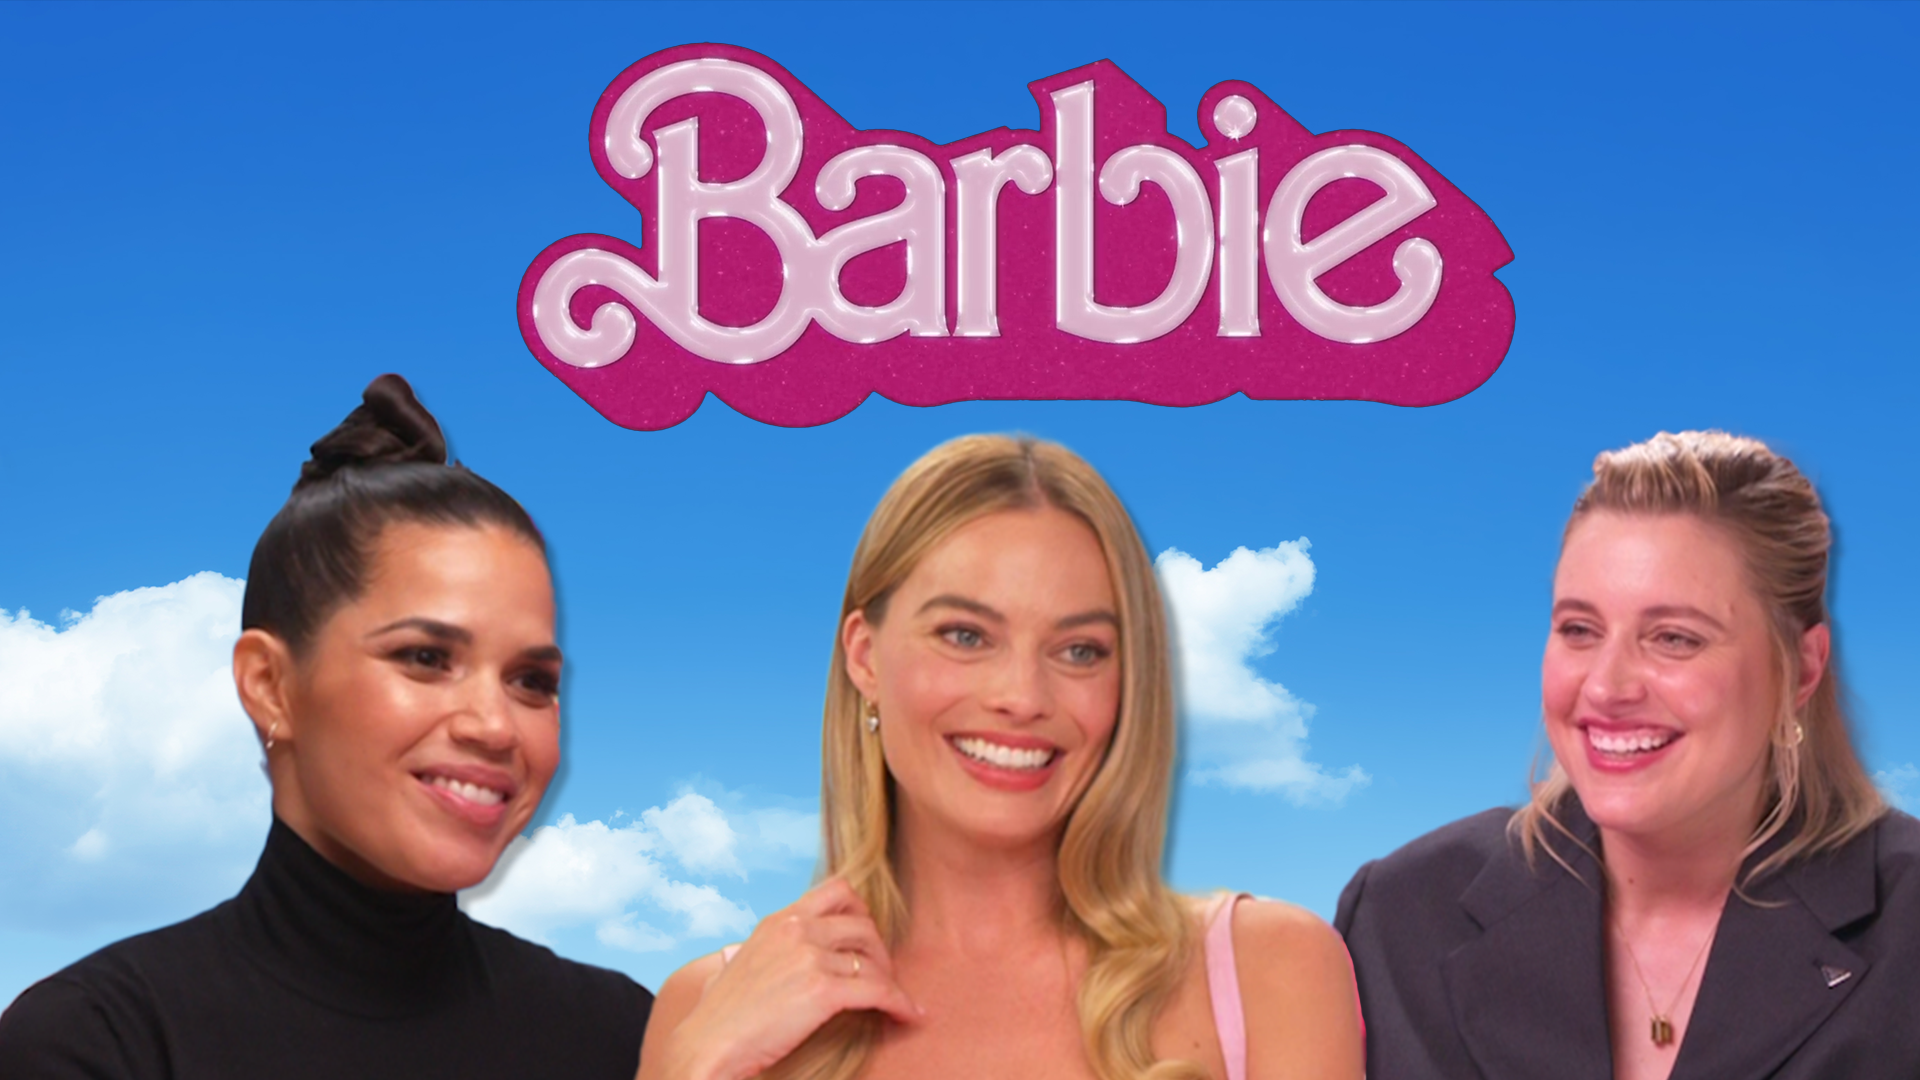 America Ferrera, Margot Robbie and Greta Gerwig smile against a sky background and a pink 'Barbie' logo hovering over